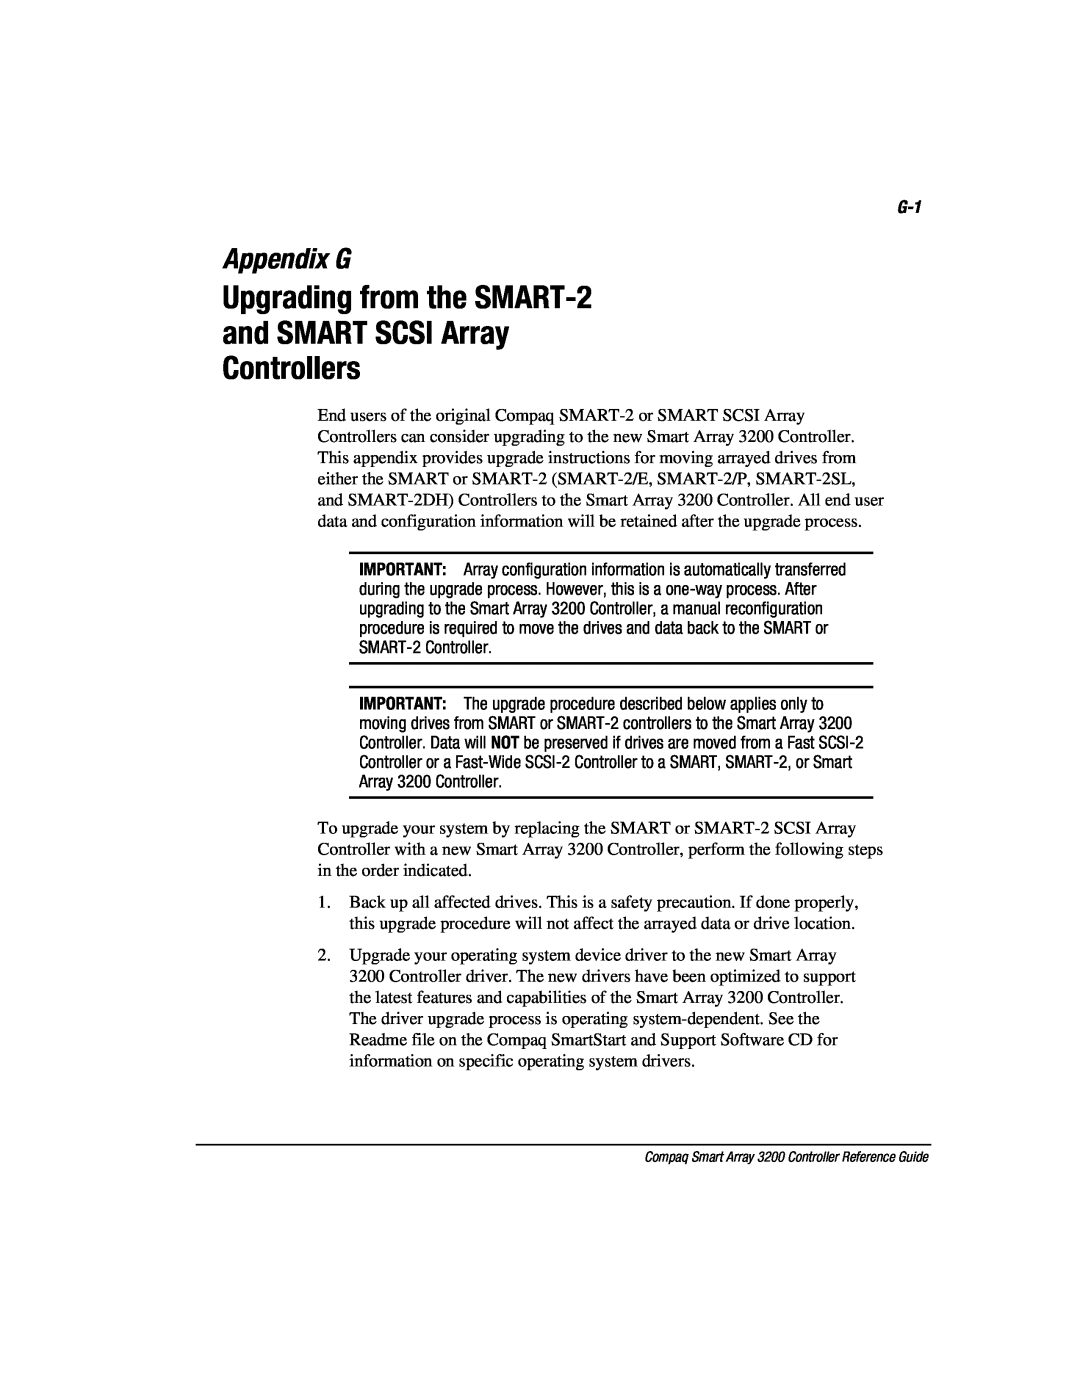 Compaq 3200 manual Upgrading from the SMART-2 and SMART SCSI Array Controllers, Appendix G 